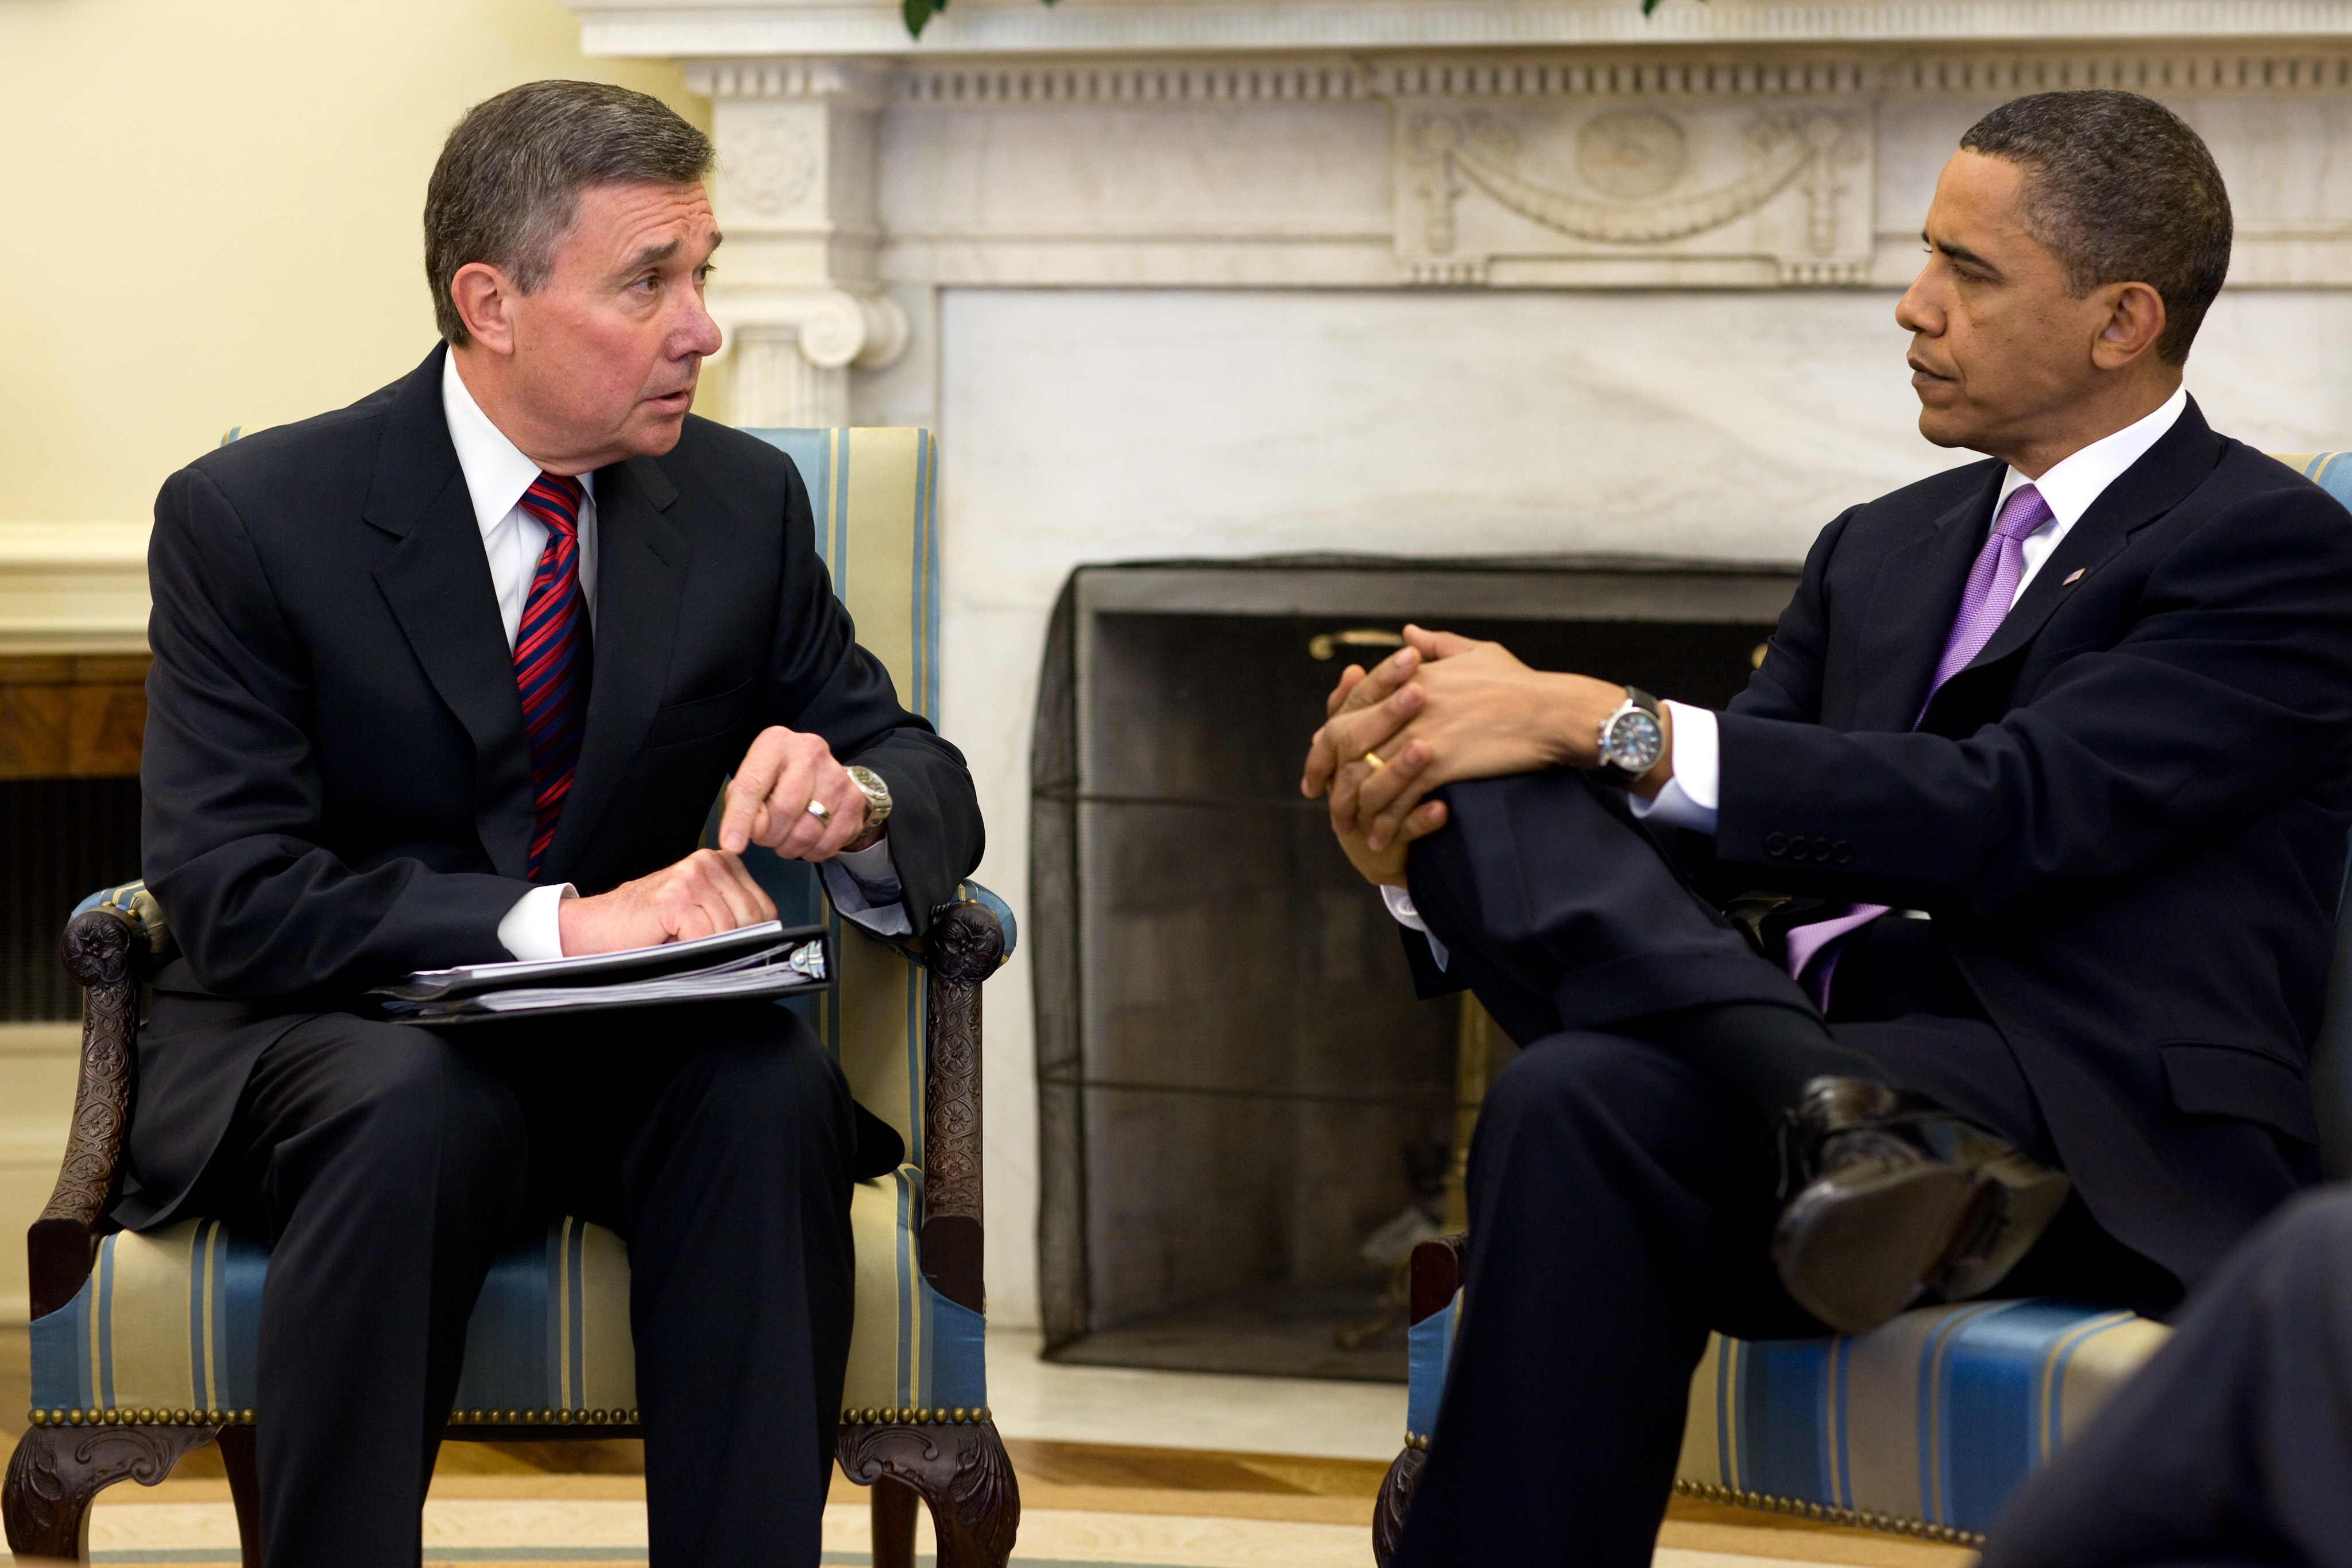 President Barack Obama discusses drug control strategy with R. Gil Kerlikowske in an undated photo from Kerlikowske's 2009-2014 tenure as director of the White House Office of National Drug Control Policy. Photo courtesy of Office of National Drug Control Policy.